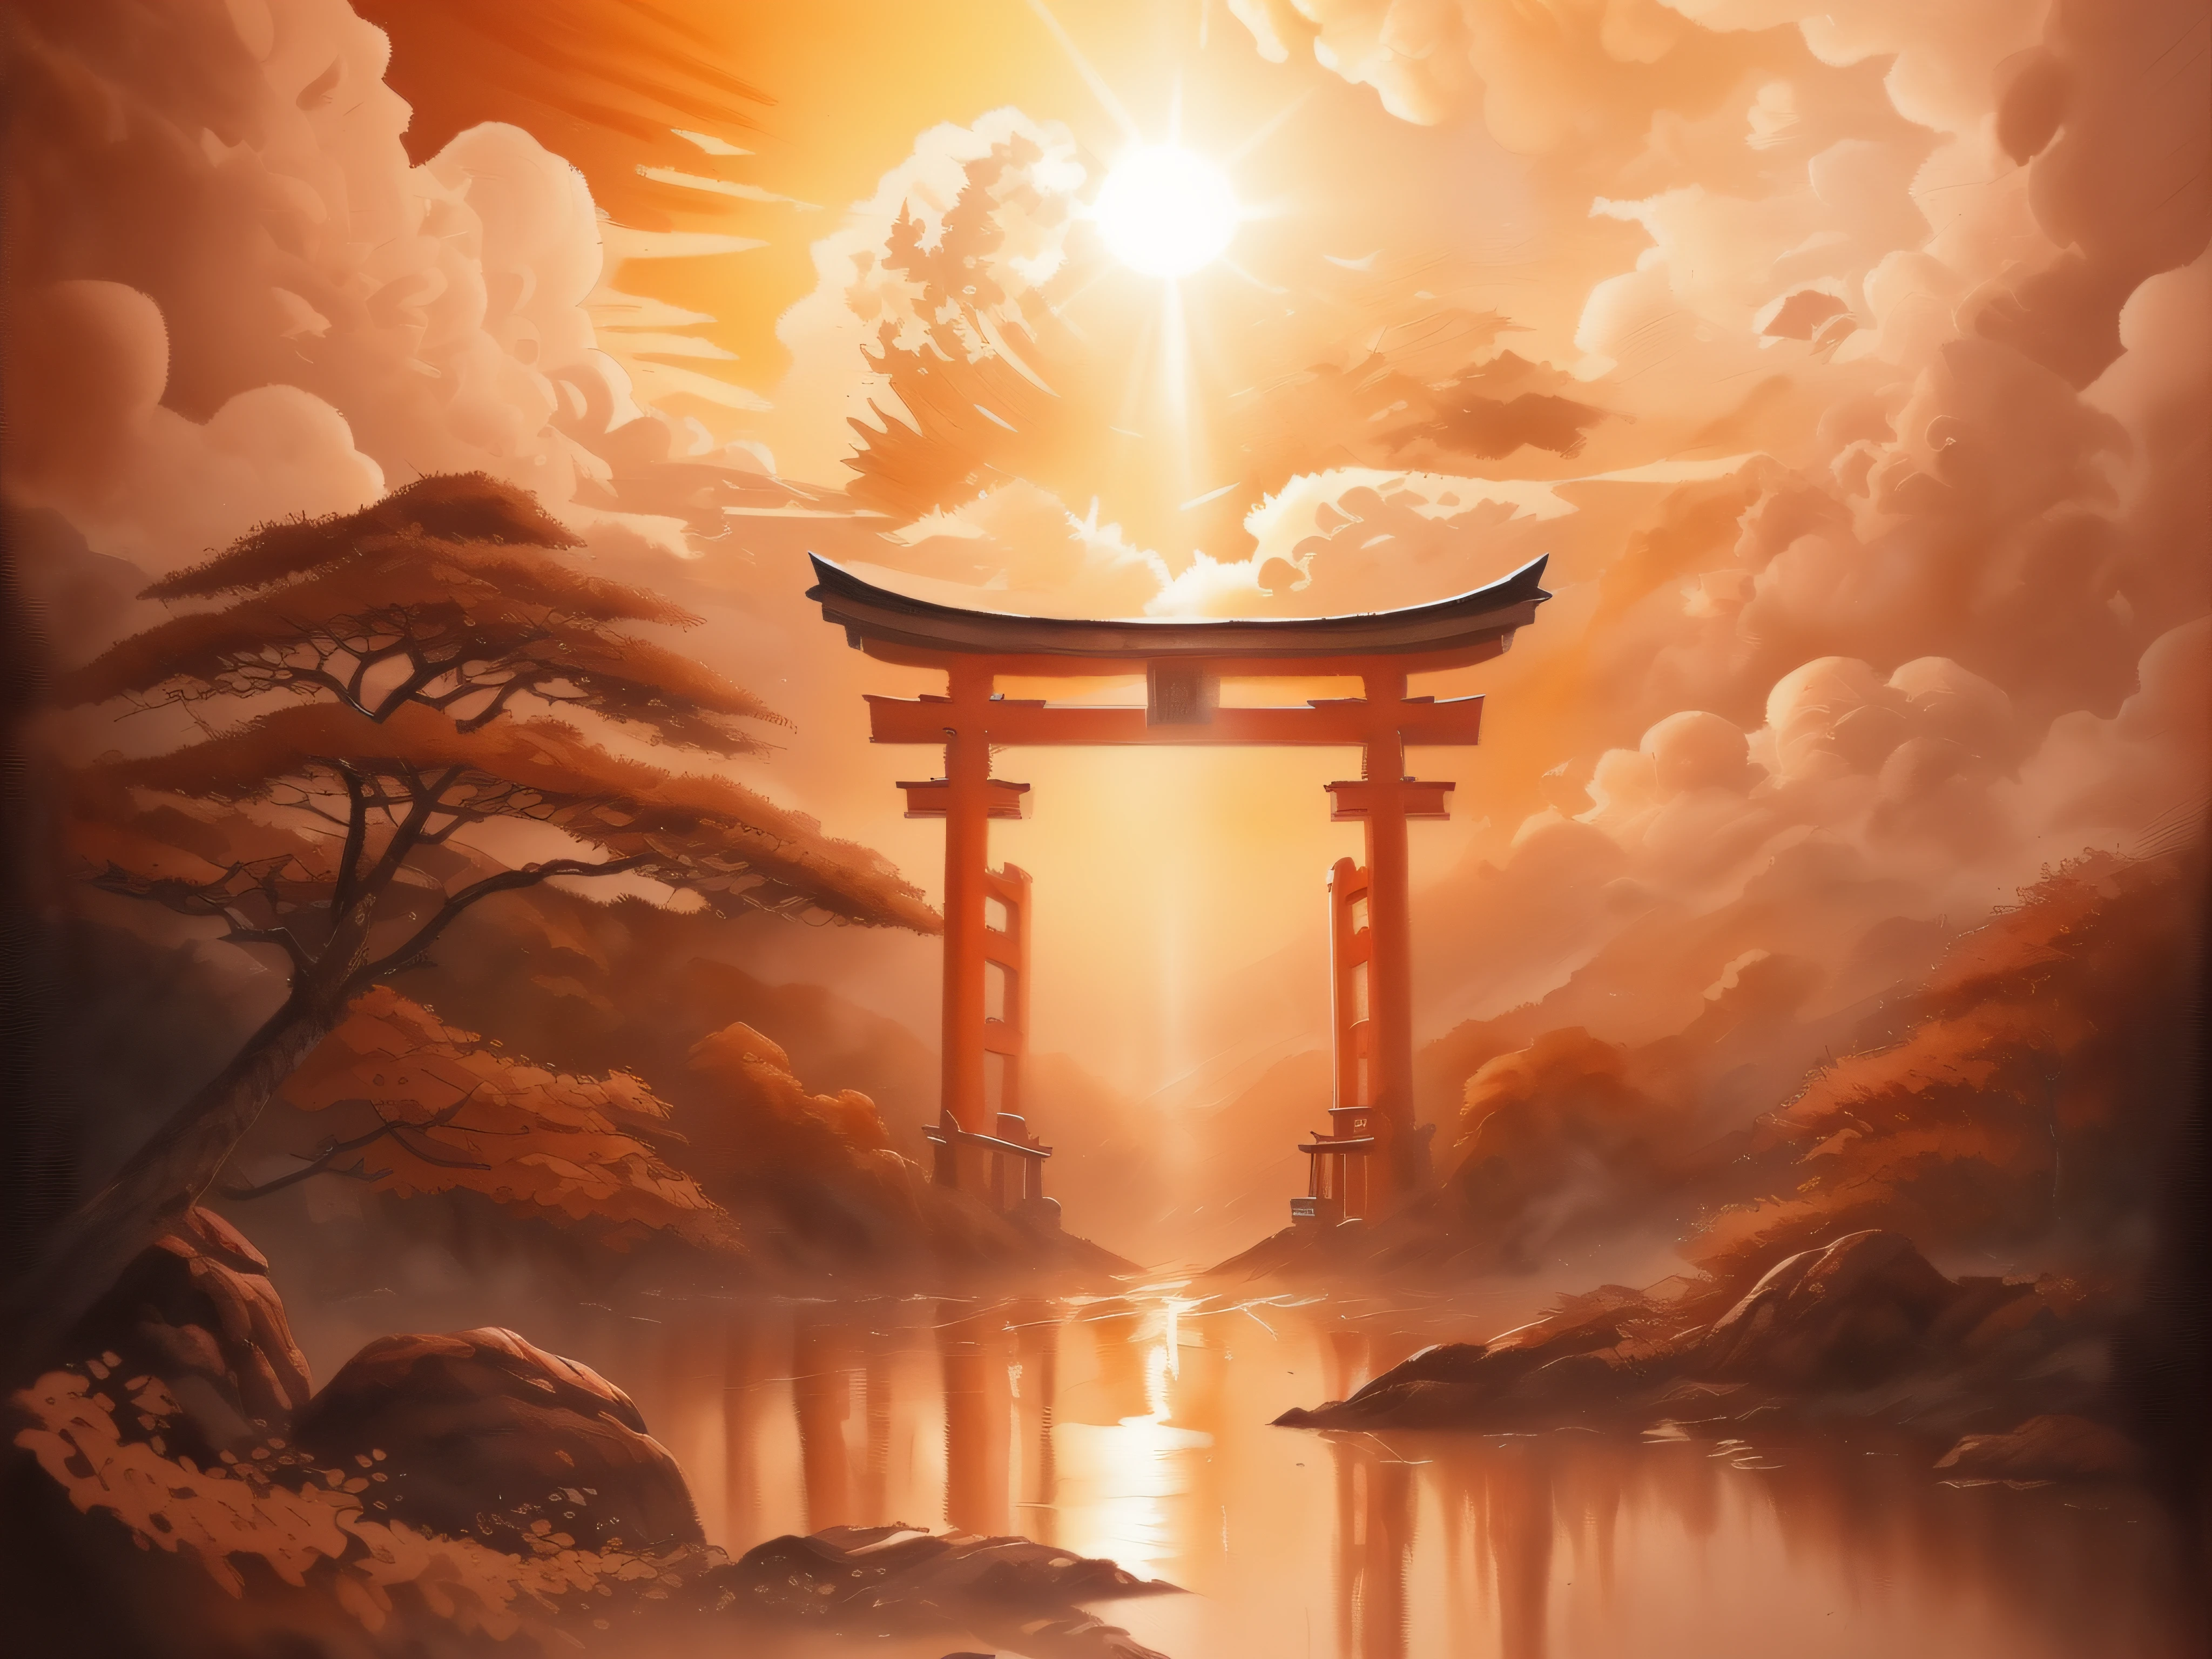 (((masutepiece))), High quality, Extremely detailed, Torii in the clouds, Sunlight, morning, Sunrise, Autumn, superfine illustration, (((Oil Painting))), realphoto, line-drawing, Approaching perfection, Insanely detailed, Concept art, epicd, Cinematic,